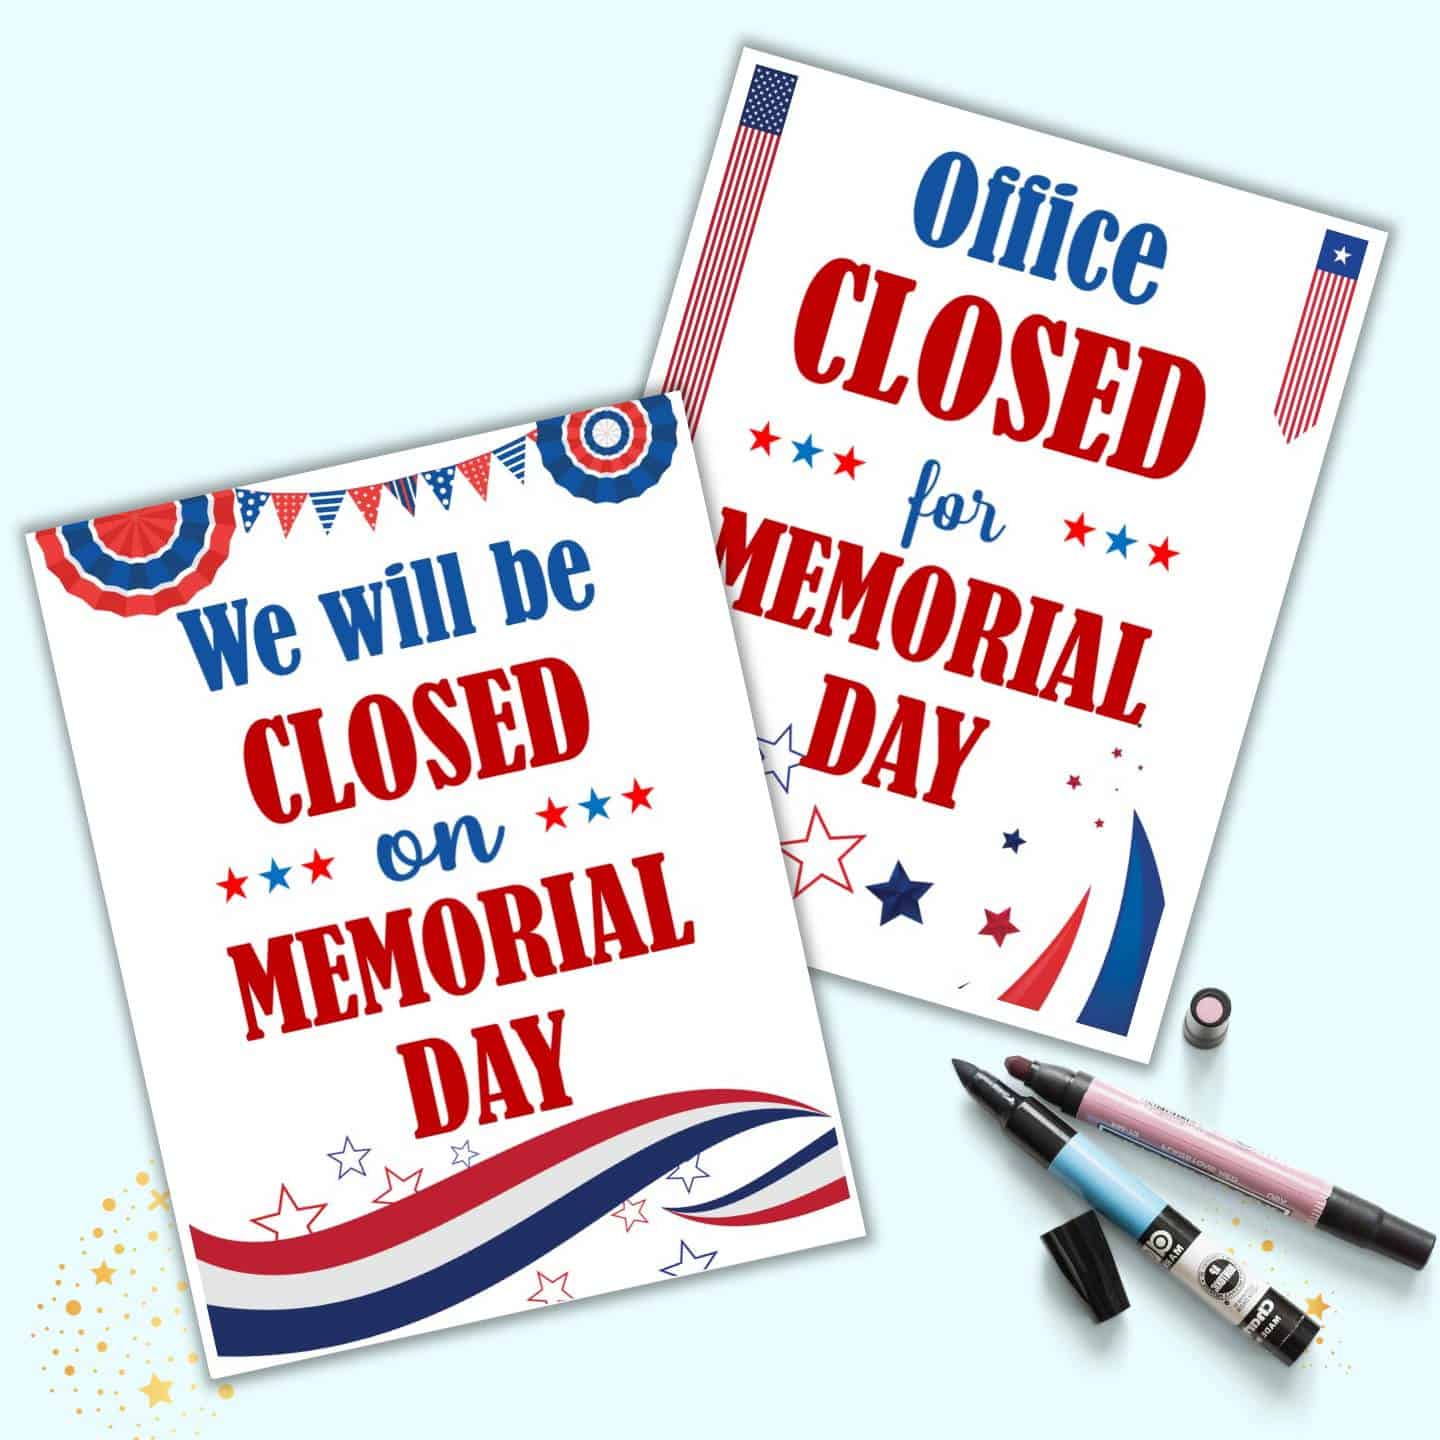 free-office-closed-for-memorial-day-sign-printable-the-artisan-life